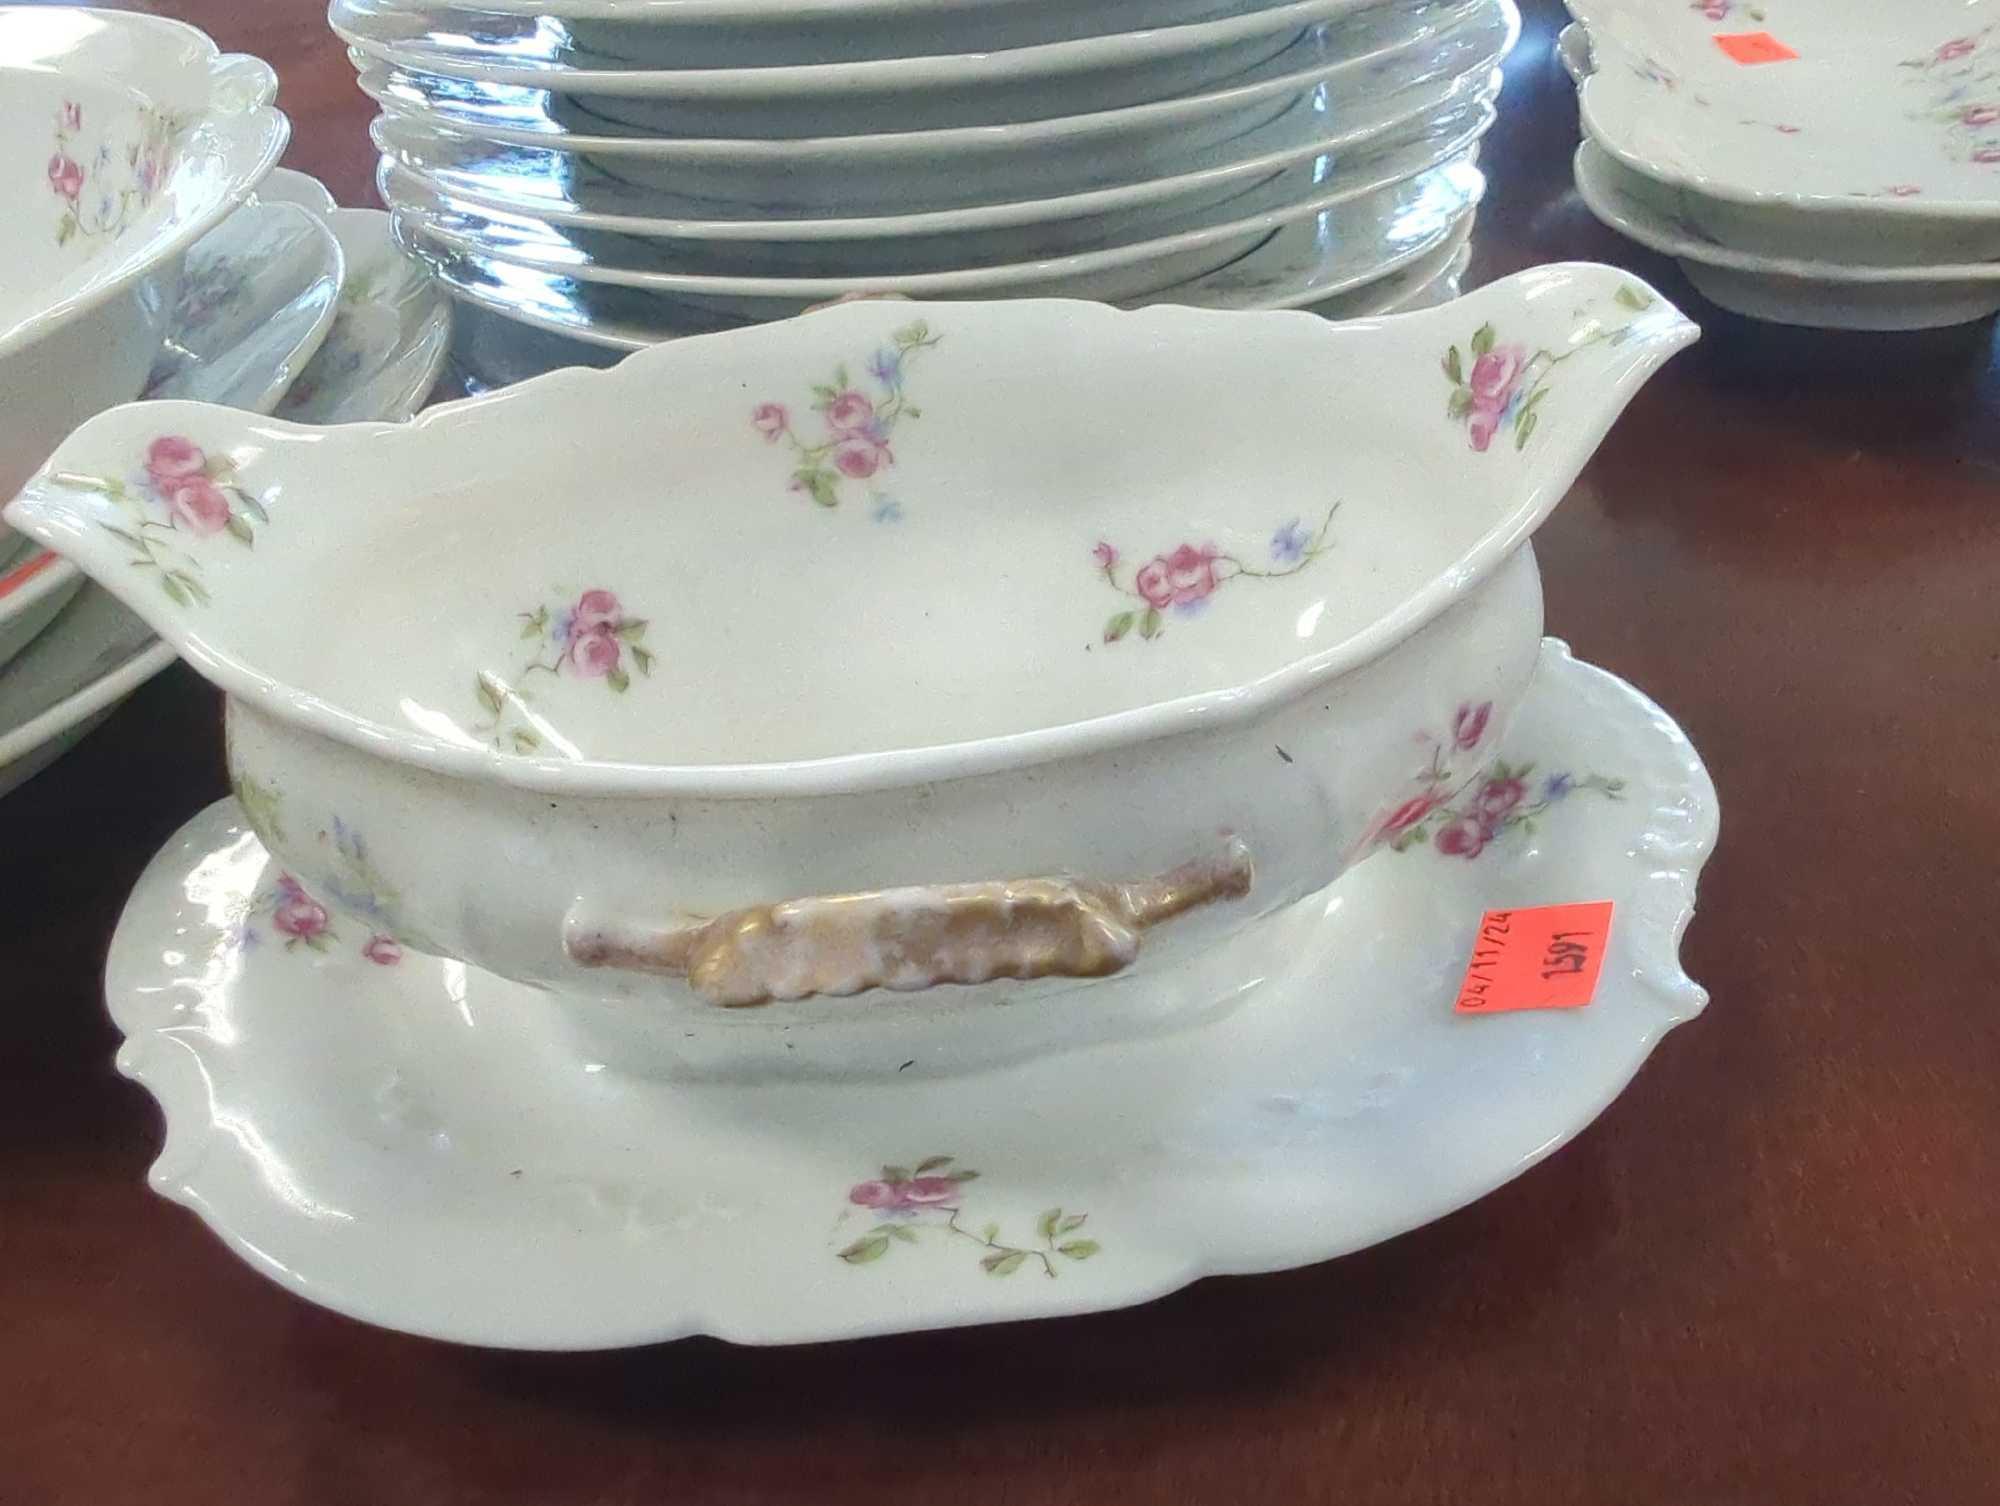 57 Piece of Haviland Limoges Schleiger Antique Dinner Service With Pink Flowers, Some of the Ware